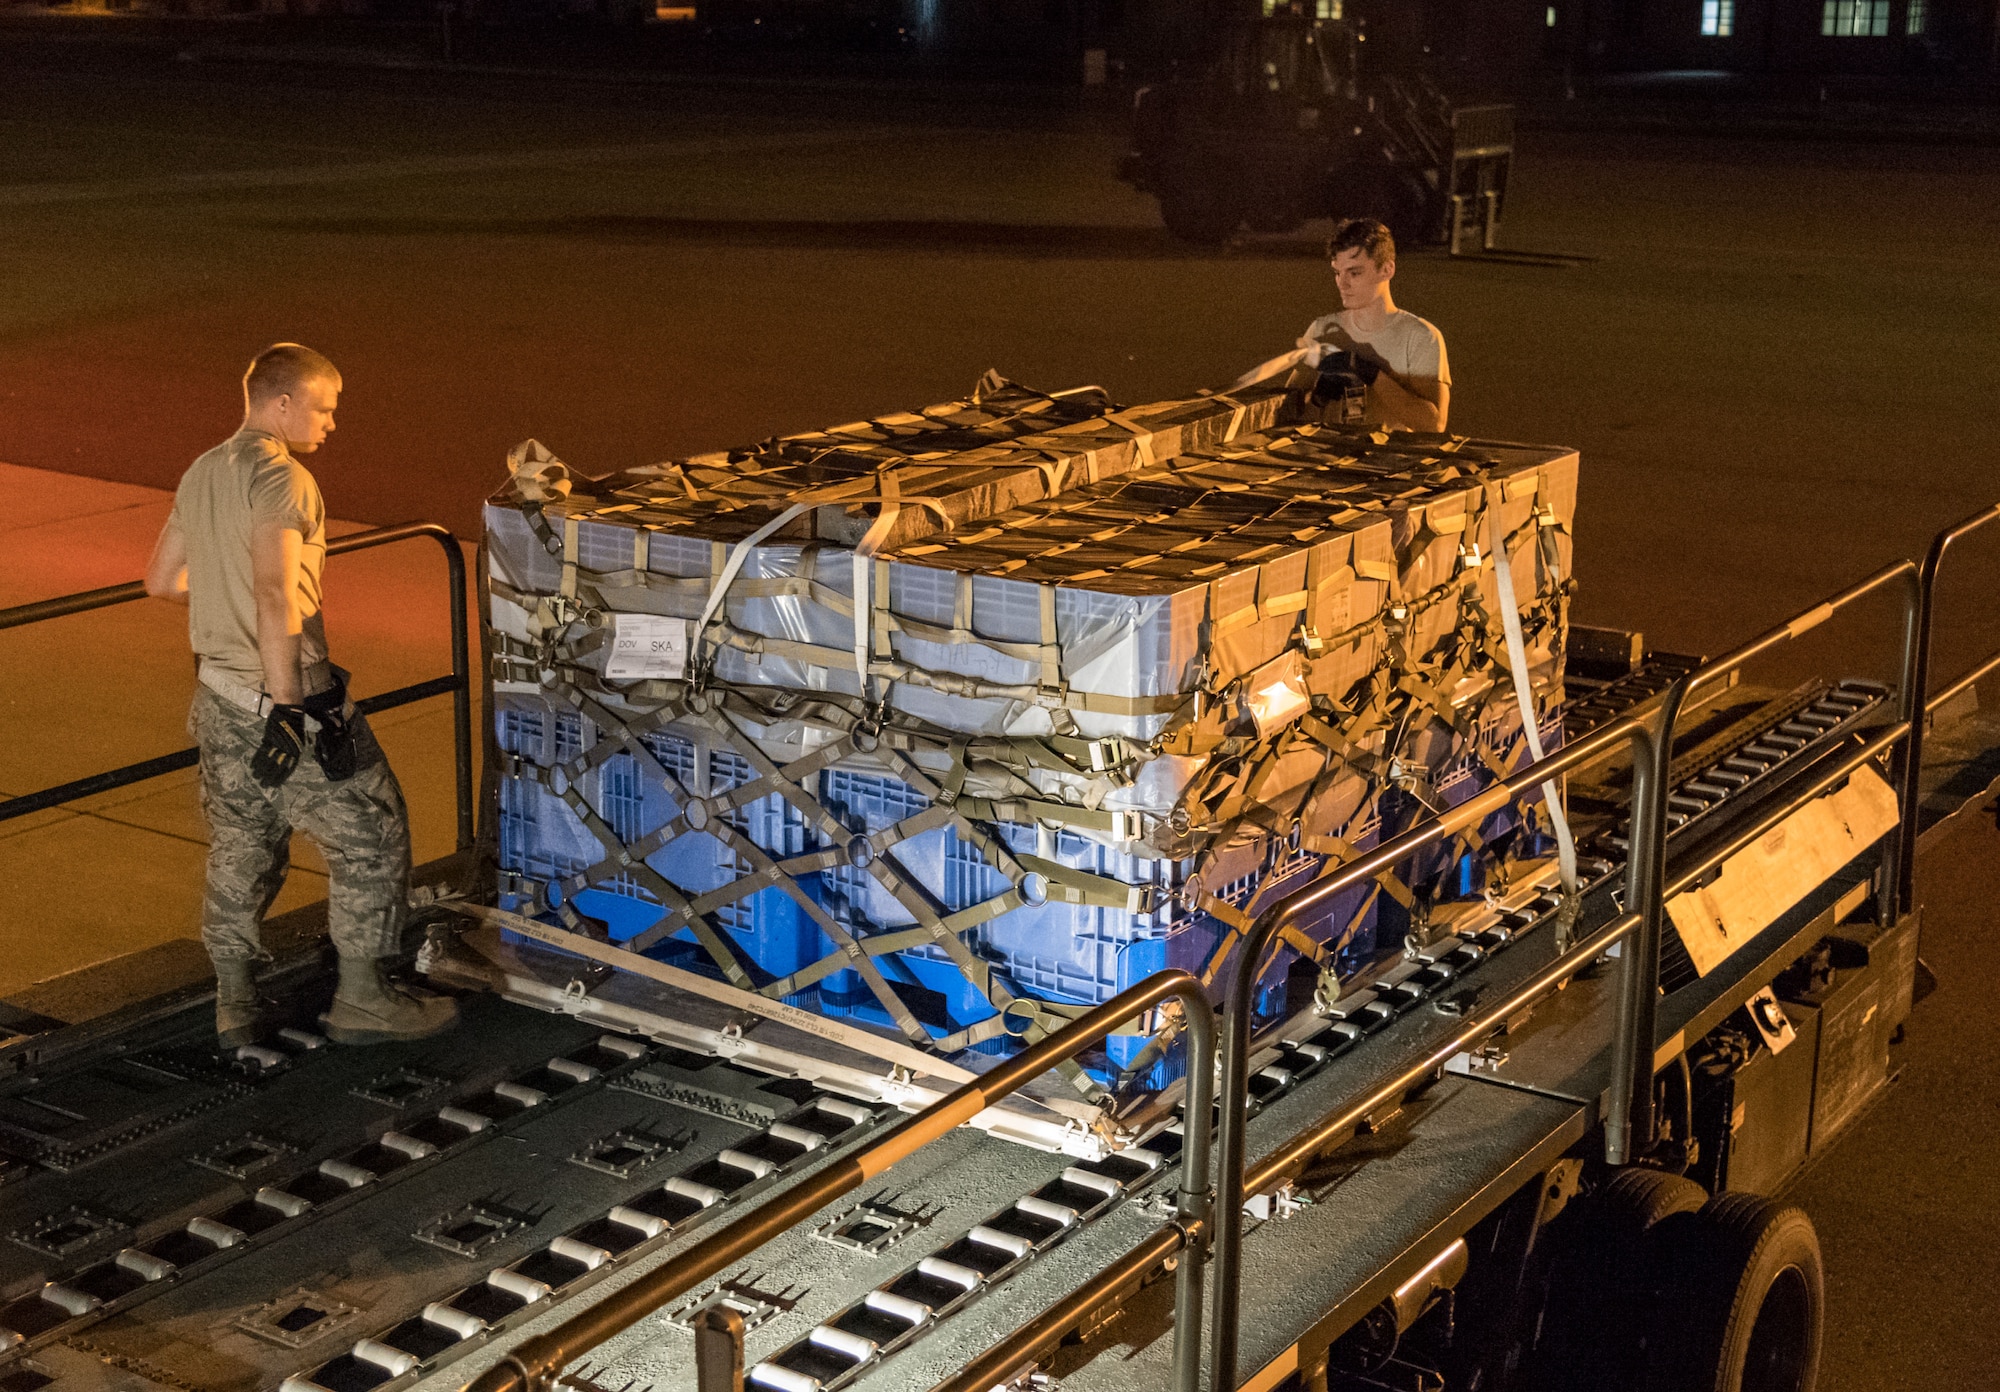 Members of 436th Aerial Port Squadron ramp services section look over cargo netting prior to loading the last pallet onto an Air Transport International Boeing 757-200 aircraft Sept. 8, 2019, at Dover Air Force Base, Del. The ATI aircraft, part of the Civil Reserve Air Fleet program, was contracted to transport cargo and 30 Team Dover members to Fairchild AFB, Wash., participating in Mobility Guardian 2019. “Air Mobility Command’s commercial airlift partners are a vital part of our daily airlift missions around the world as well as our wartime effort,” said Maj. Adam Crane, AMC Headquarters CRAF Branch Chief, Scott AFB, Ill. (U.S. Air Force photo by Roland Balik)